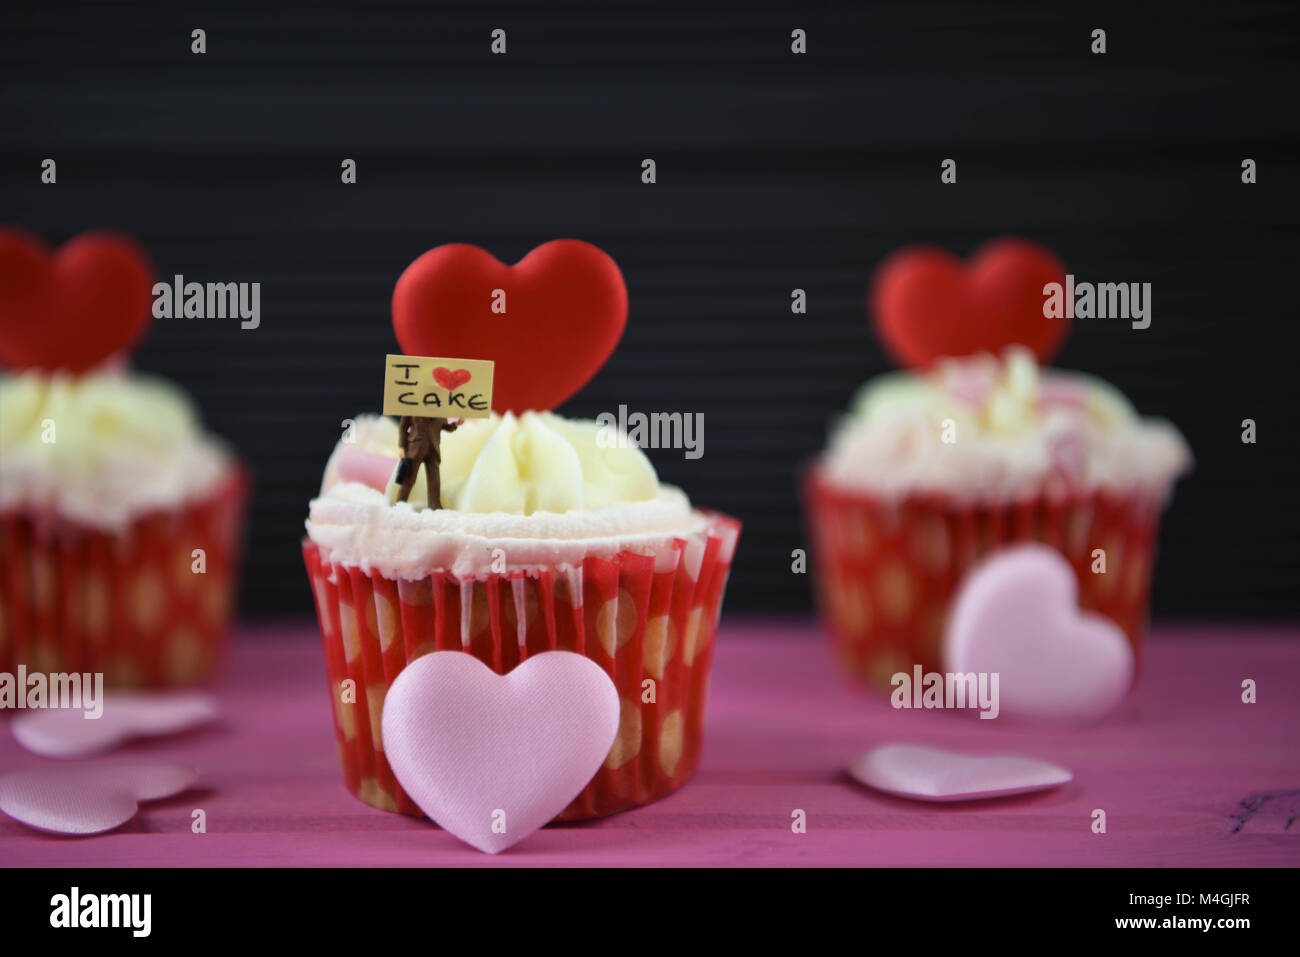 food cupcakes with love heart shapes and miniature sign for i love cake Stock Photo